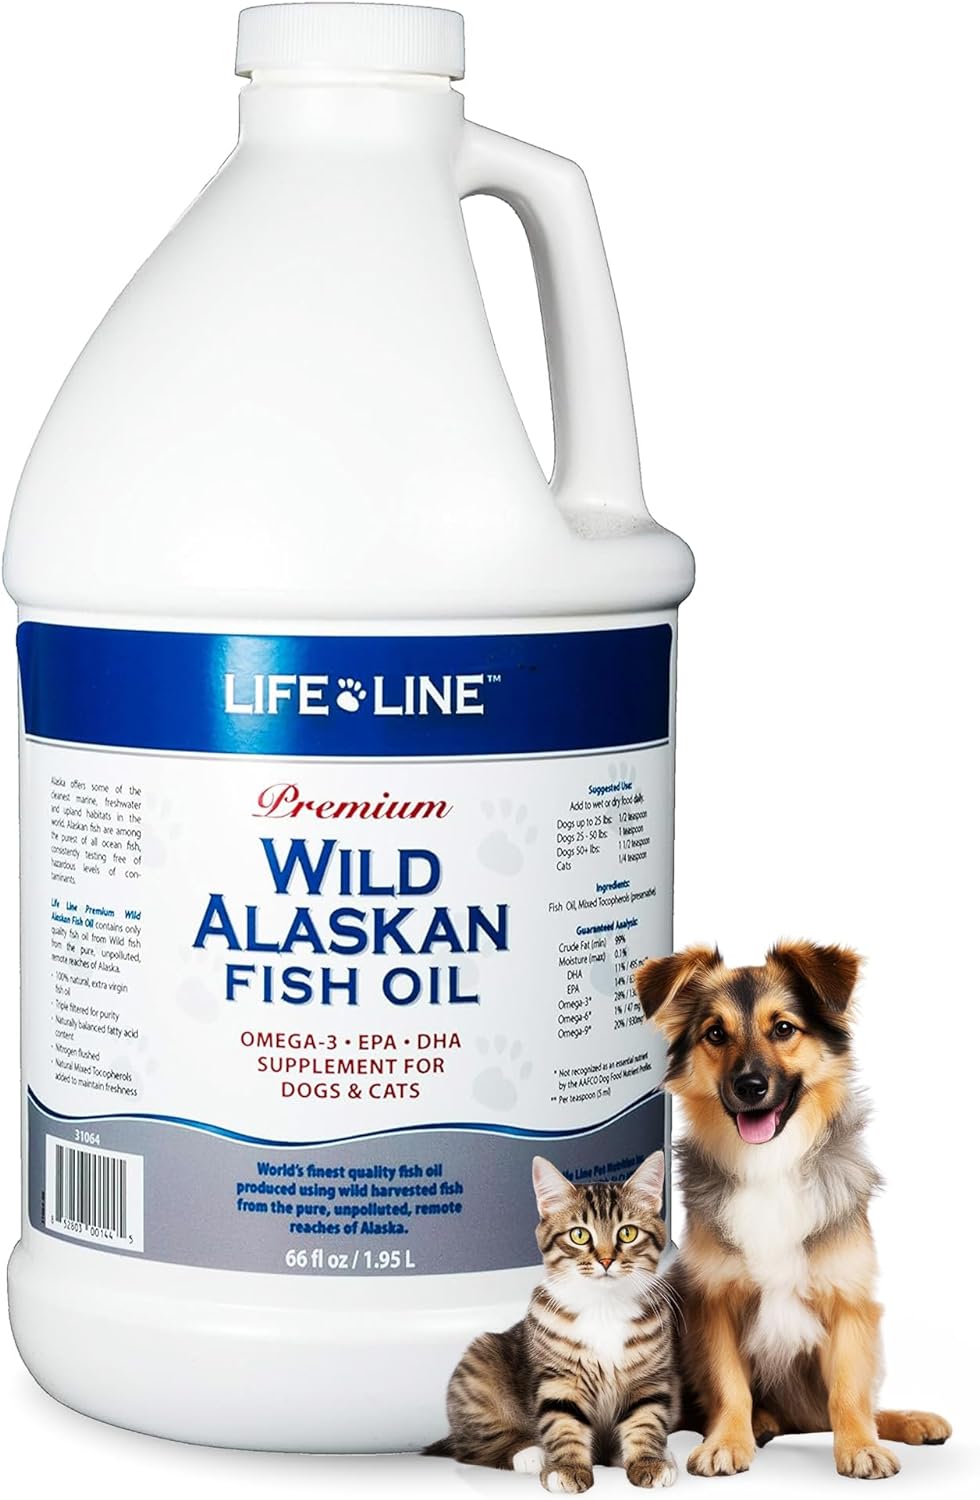 Life Line Pet Nutrition Wild Alaskan Fish Oil Omega-3 Supplement for Skin & Coat – Supports Brain, Eye & Heart Health in Dogs & Cats, 66oz